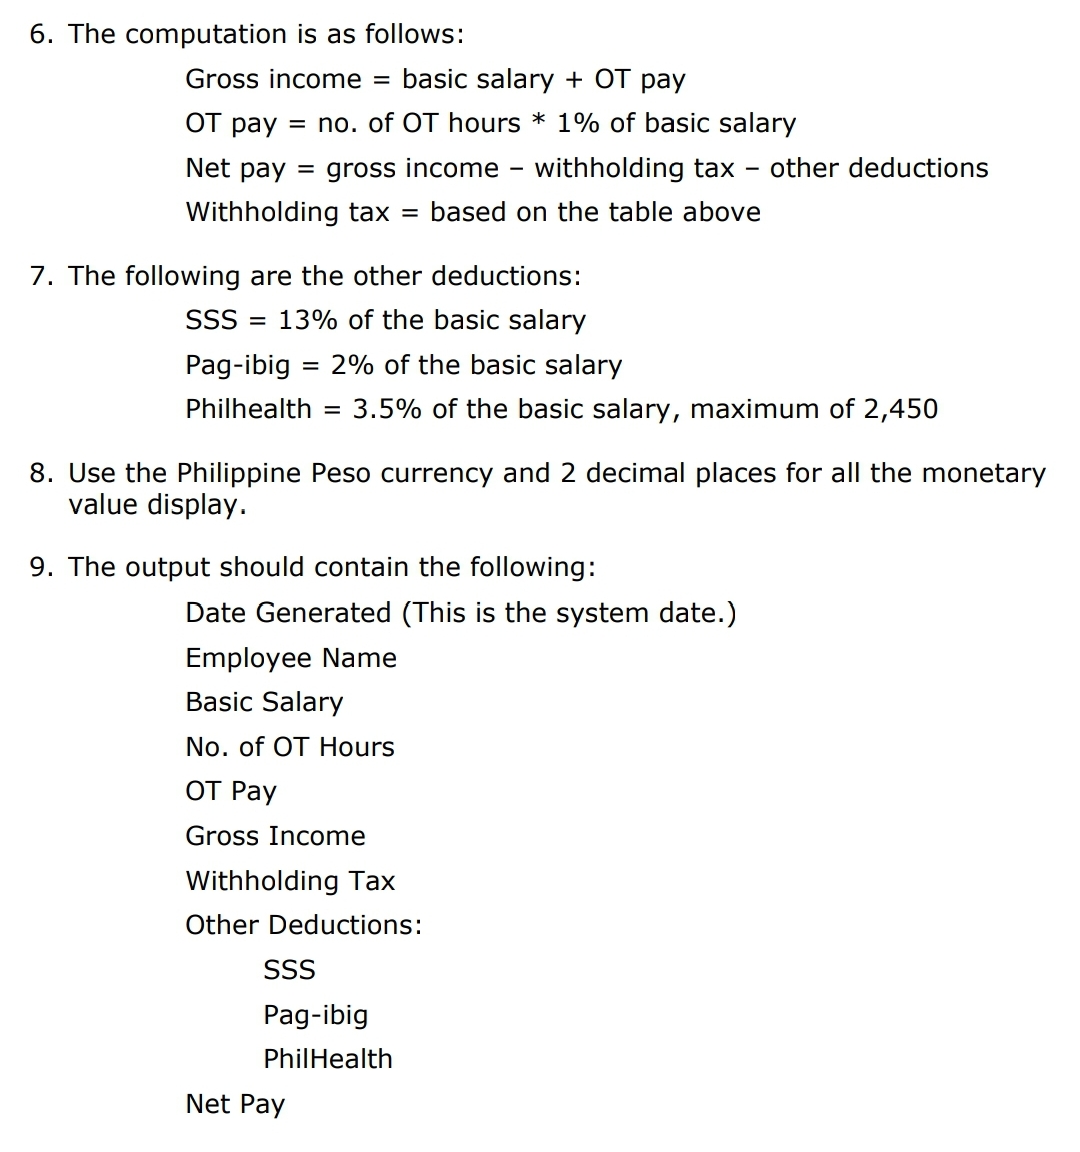 6. The computation is as follows:
Gross income
basic salary + OT pay
OT pay = no. of OT hours * 1% of basic salary
Net pay
= gross income
withholding tax
other deductions
Withholding tax =
based on the table above
7. The following are the other deductions:
SSS
13% of the basic salary
Pag-ibig = 2% of the basic salary
Philhealth
3.5% of the basic salary, maximum of 2,450
8. Use the Philippine Peso currency and 2 decimal places for all the monetary
value display.
9. The output should contain the following:
Date Generated (This is the system date.)
Employee Name
Basic Salary
No. of OT Hours
ОТ Рay
Gross Income
Withholding Tax
Other Deductions:
SSS
Pag-ibig
PhilHealth
Net Pay
